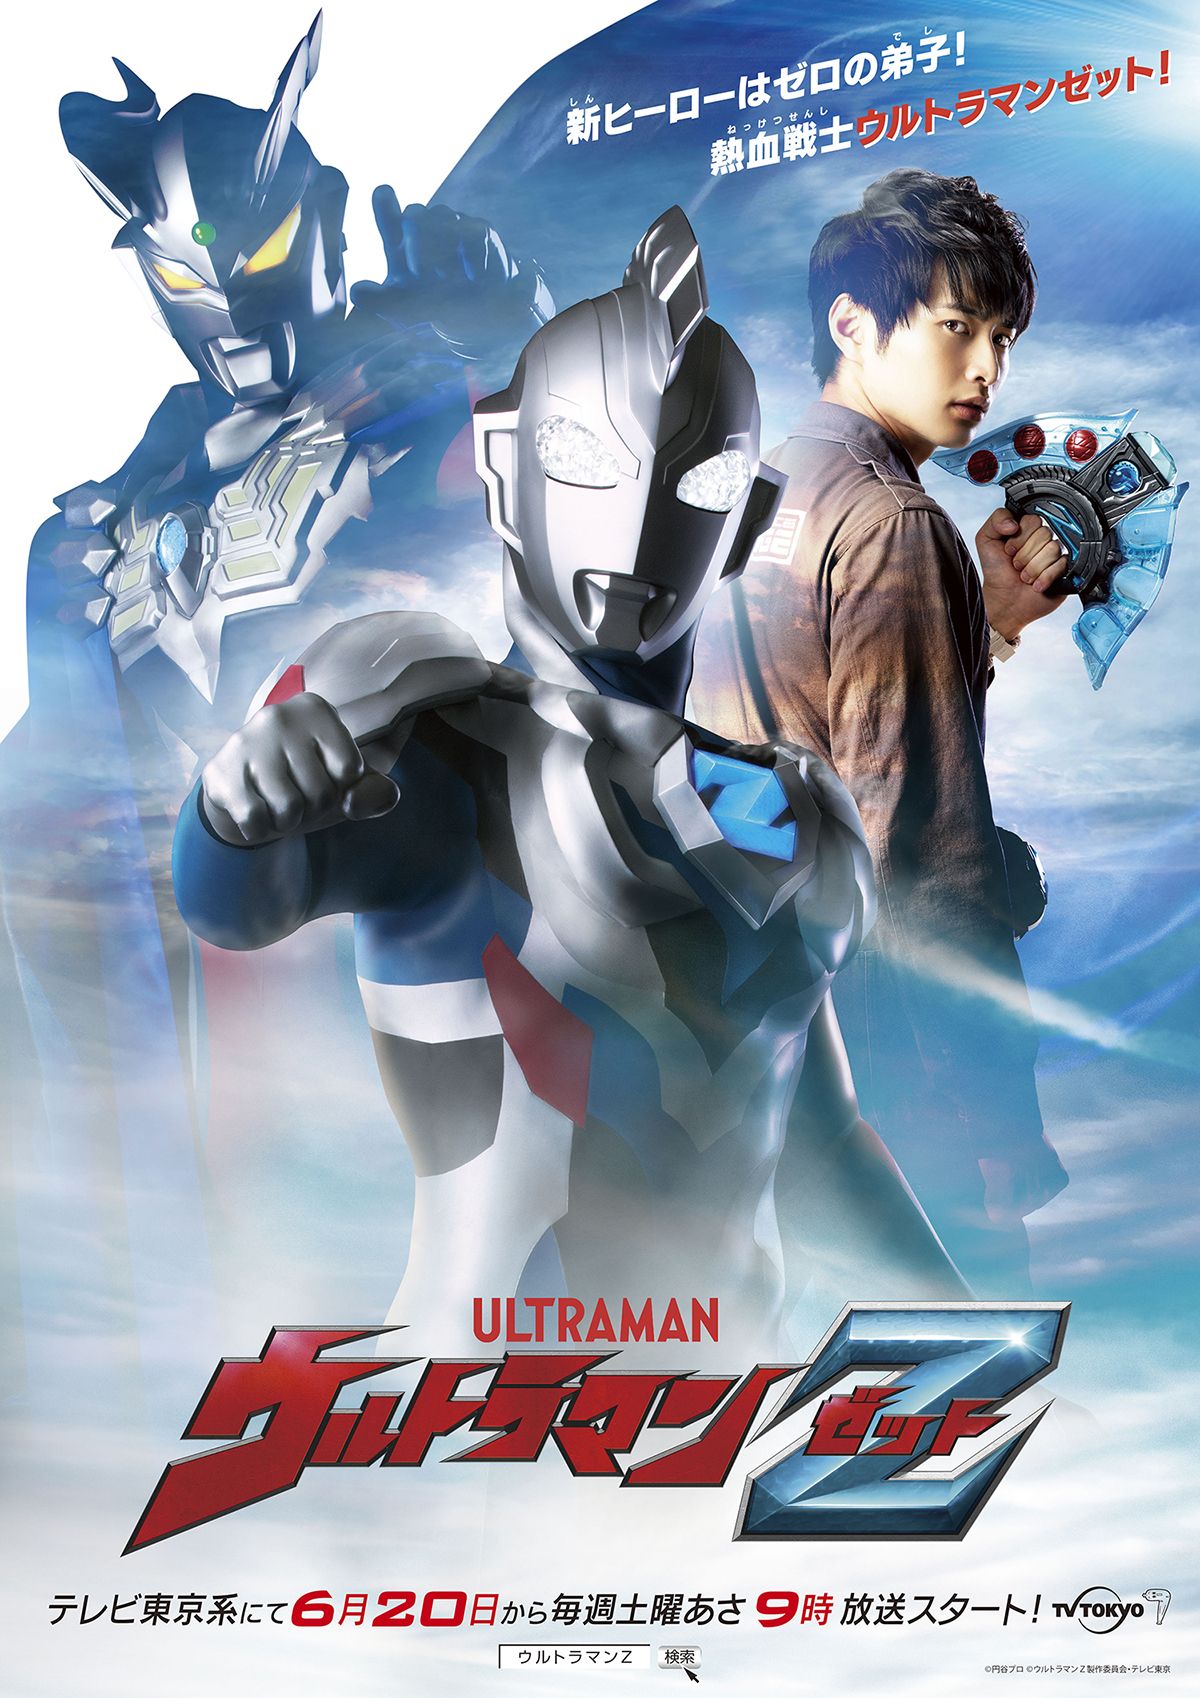 Ultraman Wallpaper HD Amazing for Android  Free App Download